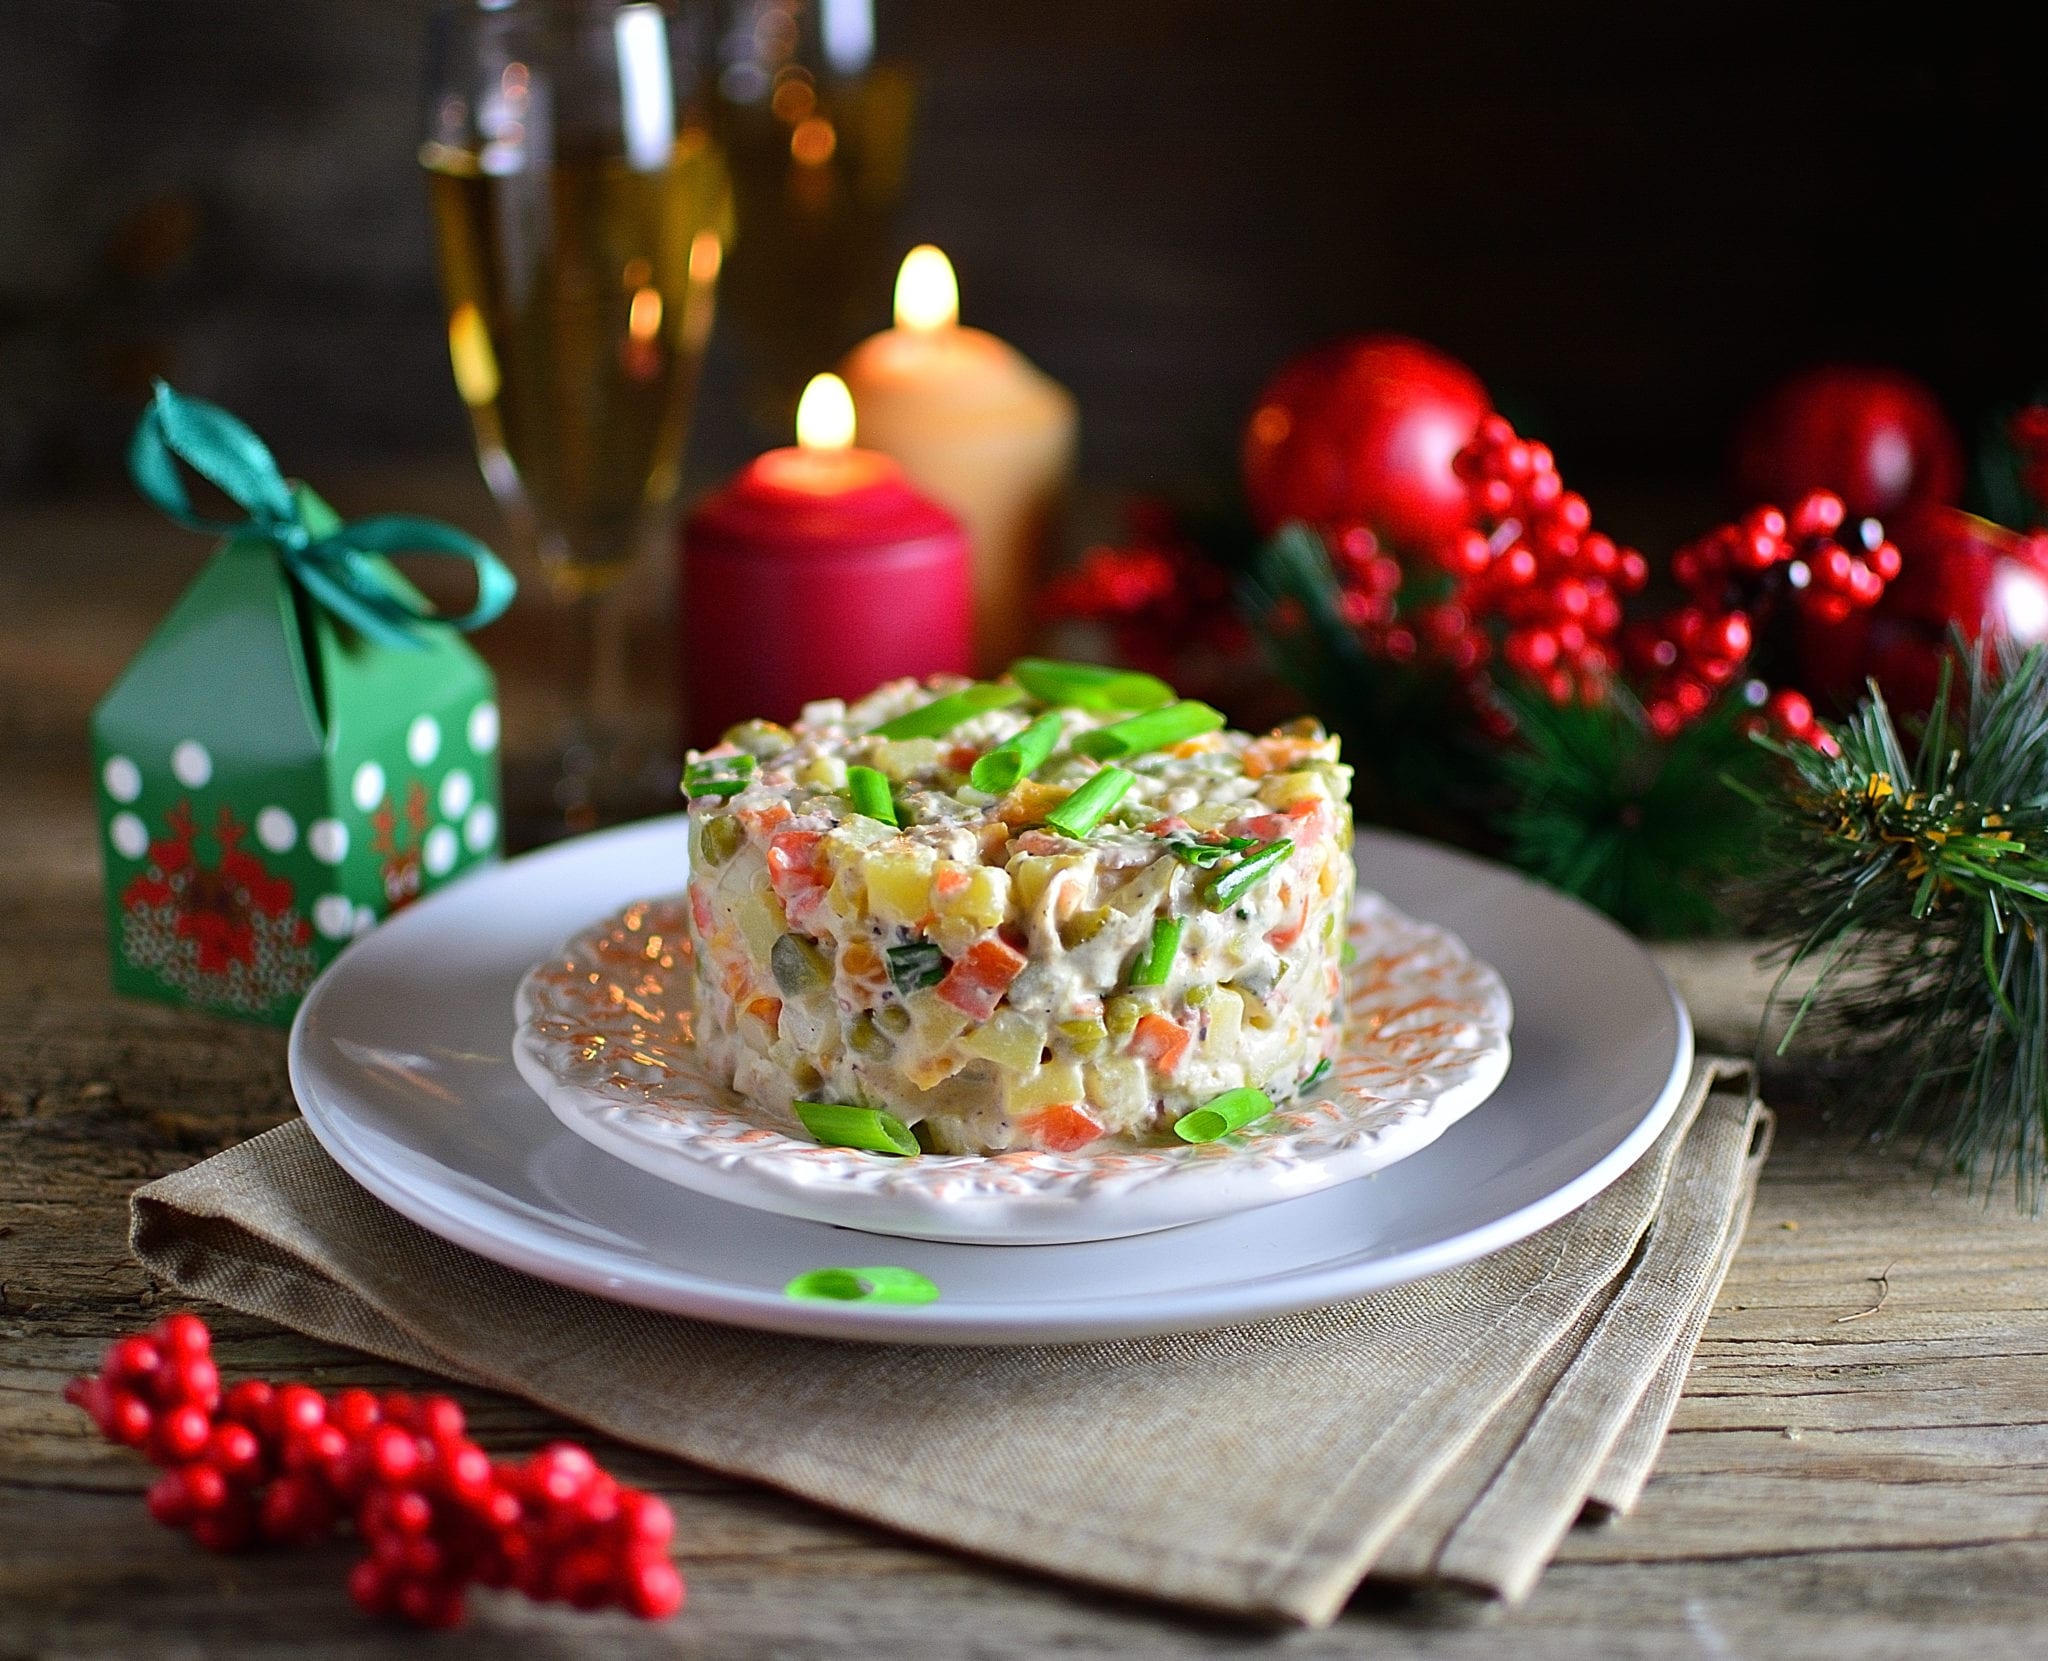 The history of Russia’s iconic New Year’s dish: Salad Olivier